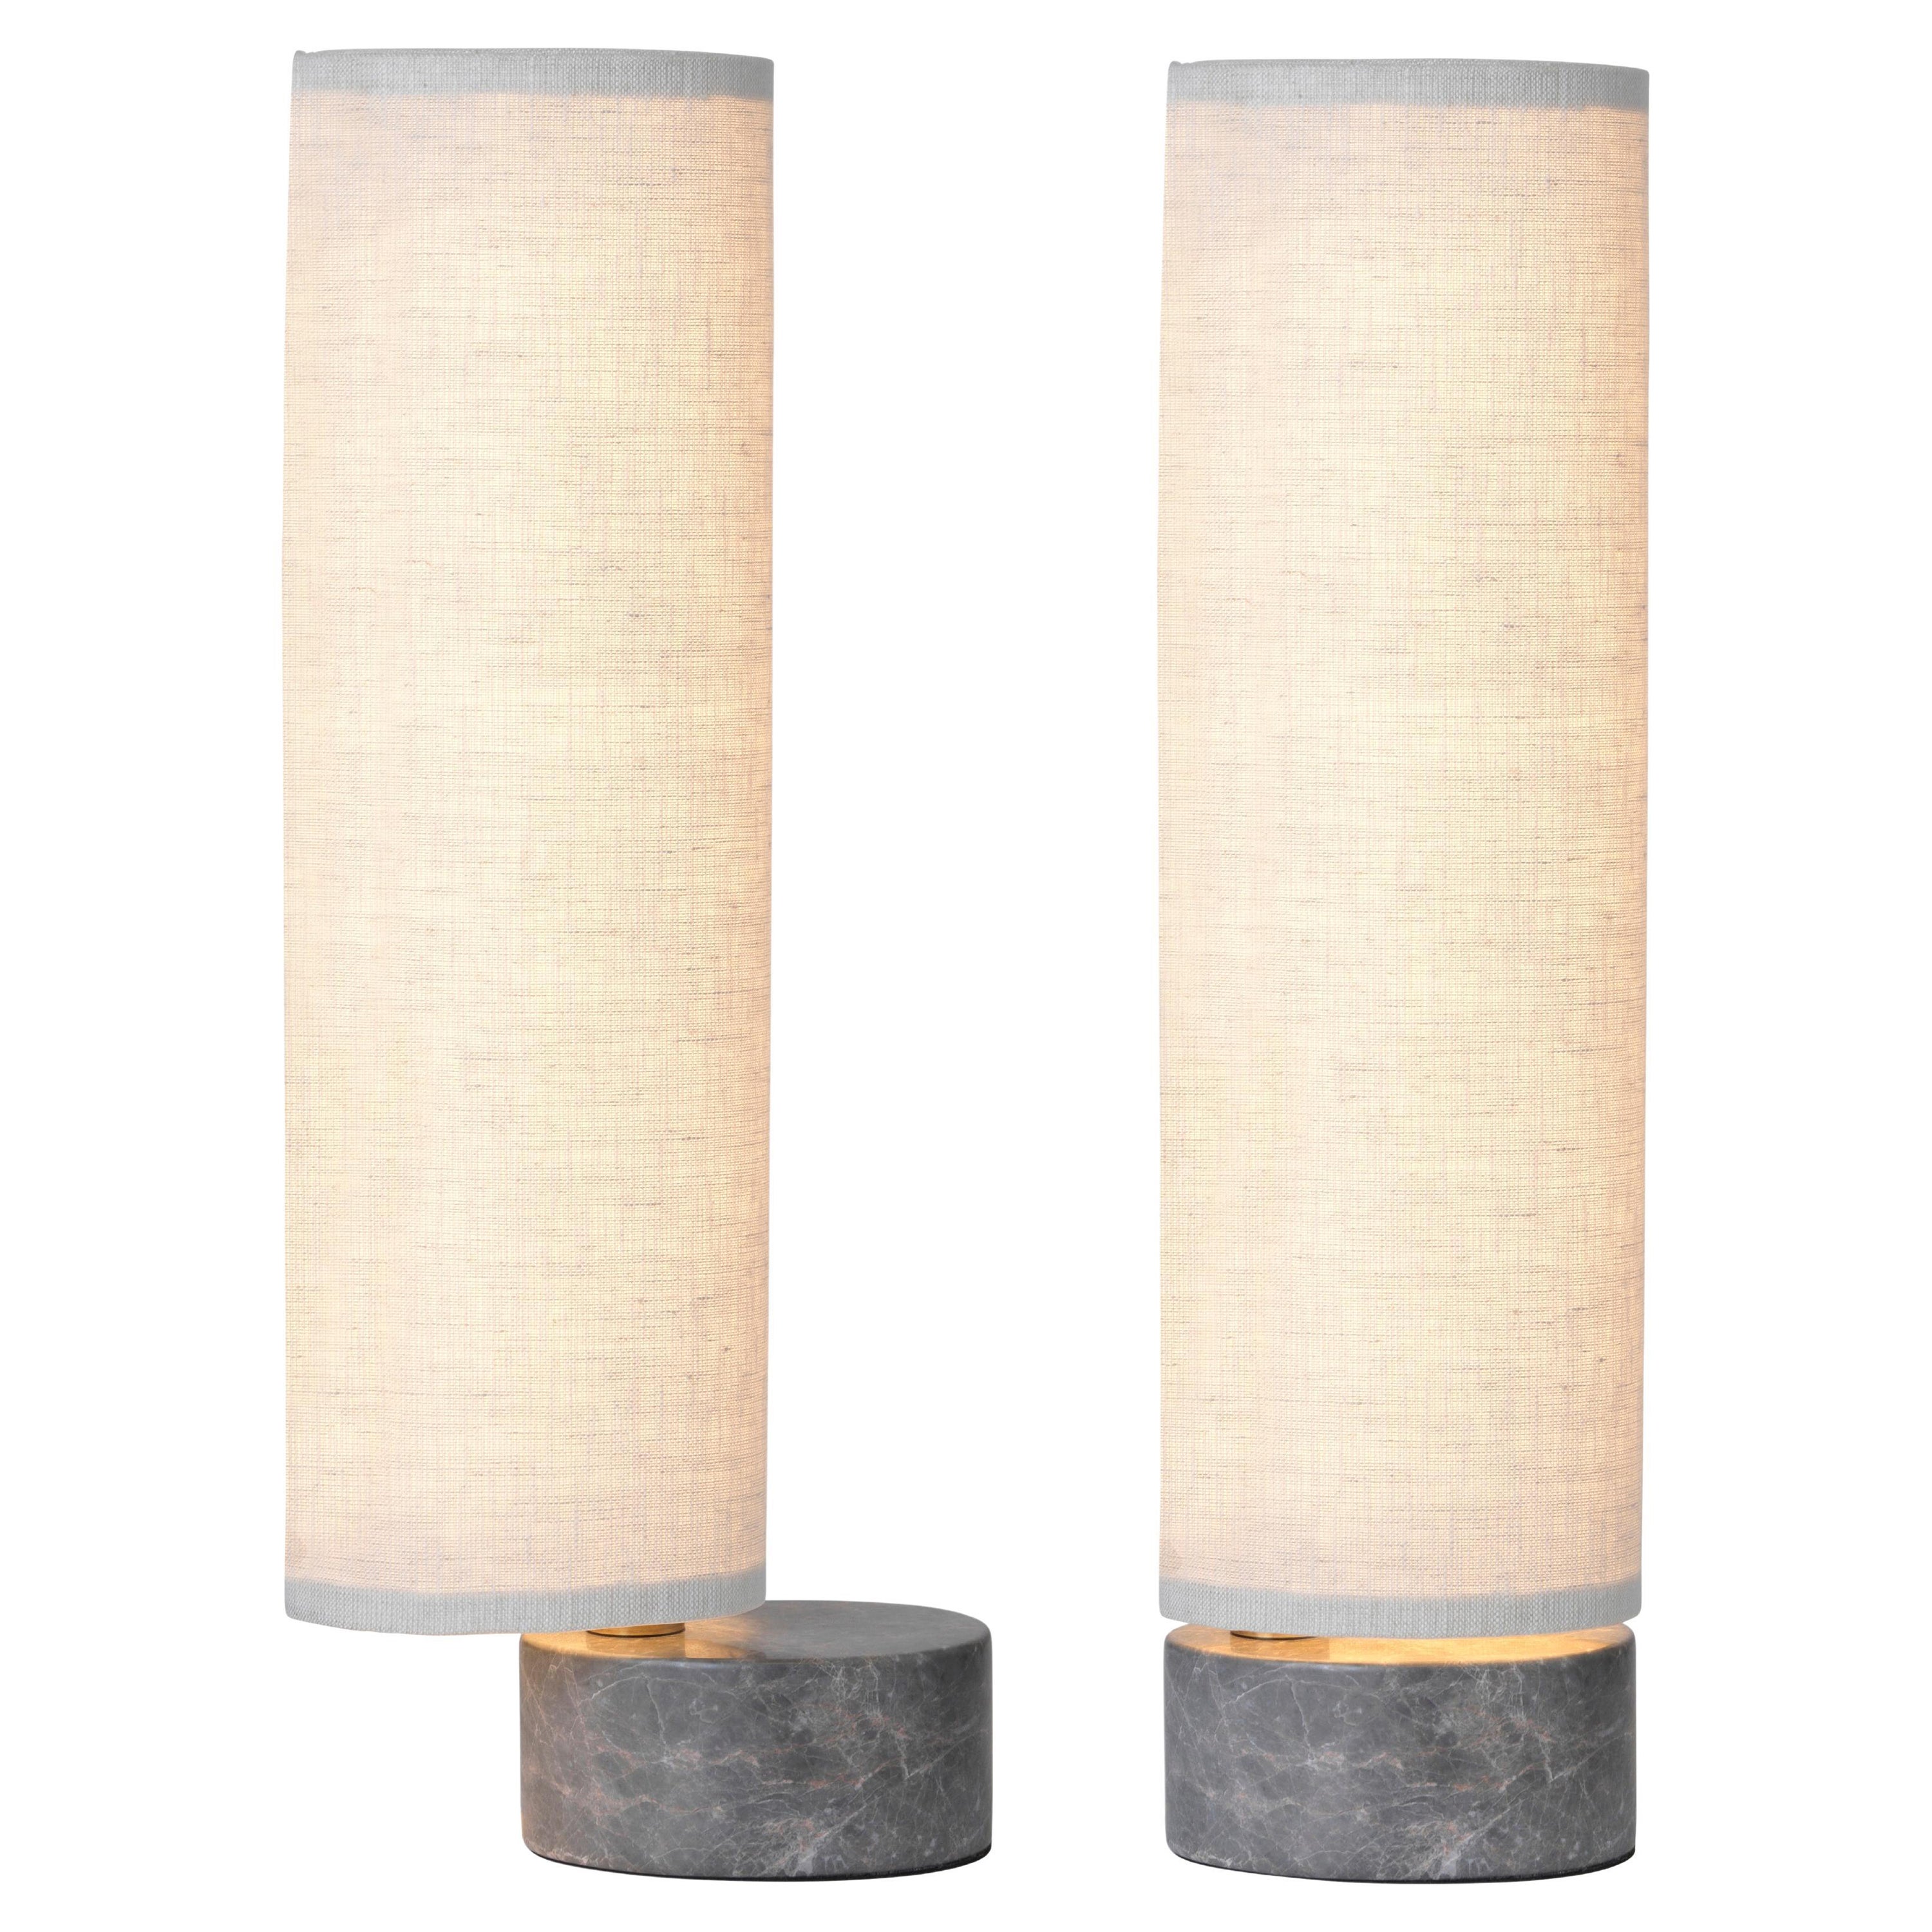 'Unbound' Table Lamp by Space Copenhagen for GUBI with Natural Canvas Shade For Sale